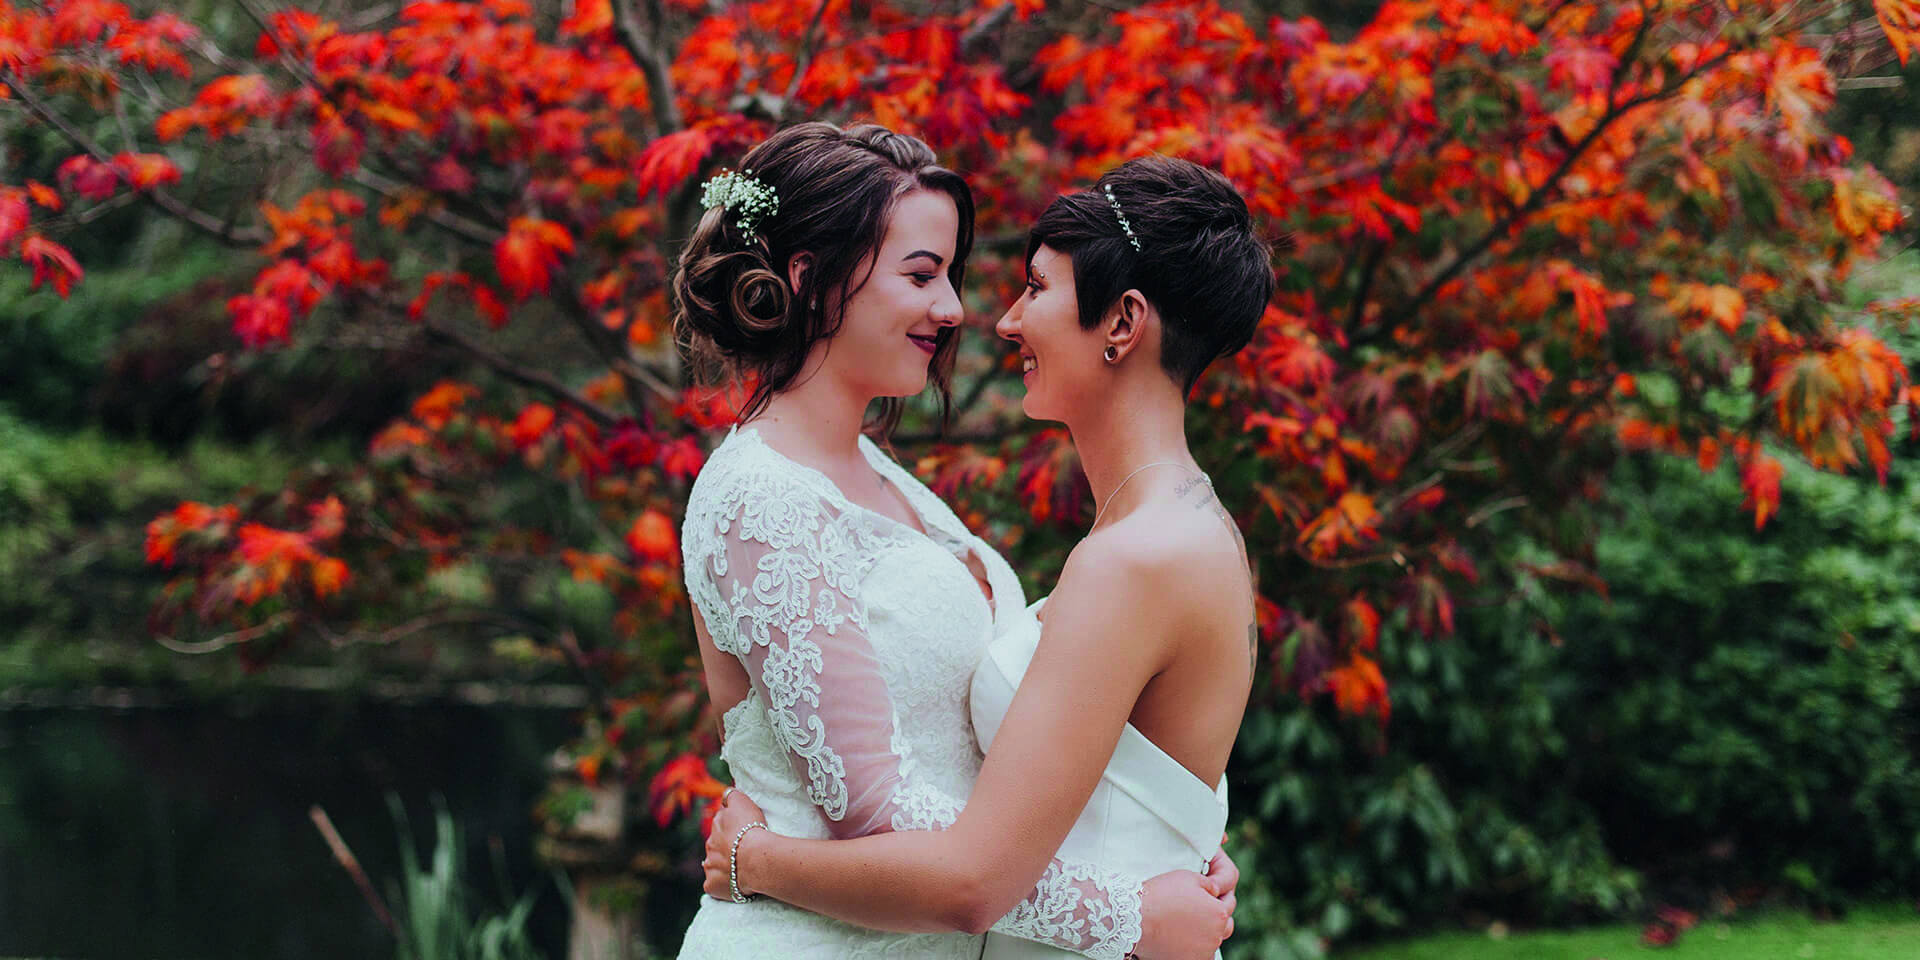 The brides pose in front of autumn leaves at this beautiful Hampshire wedding venue